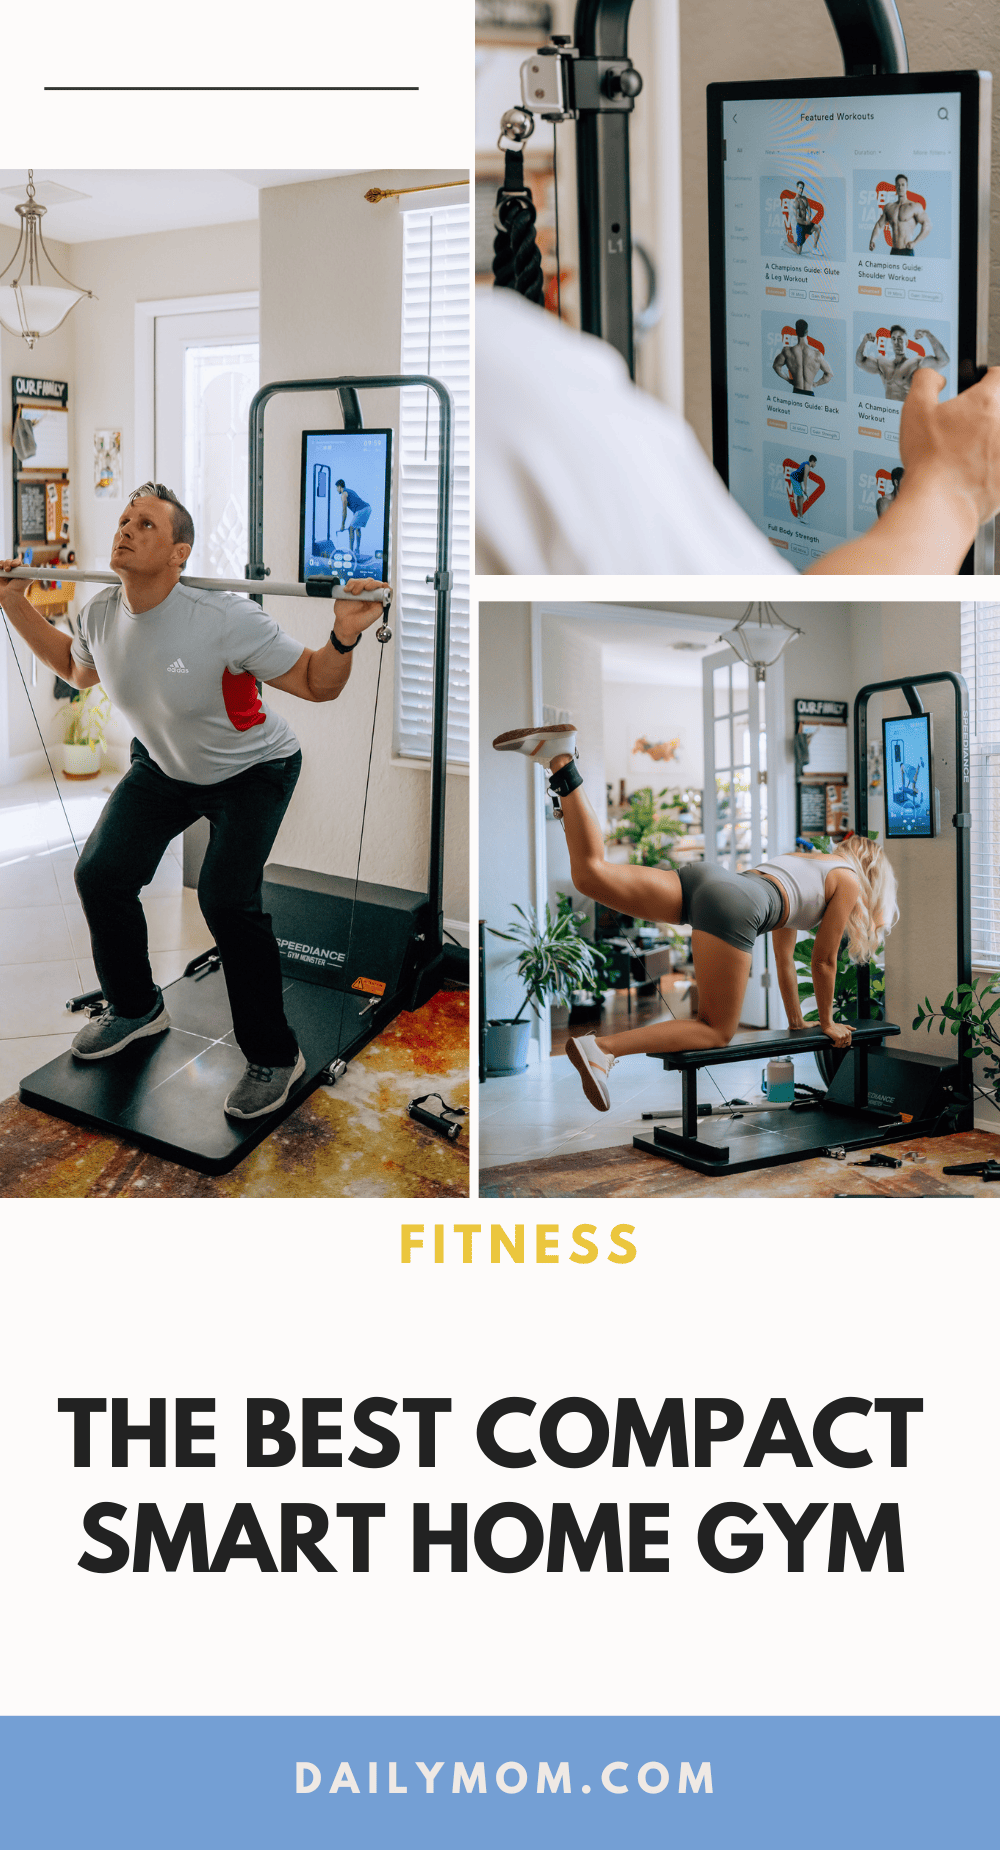 Speediance: The Best Home Gym Machine You'Ll Actually Use In 2023 62 Daily Mom, Magazine For Families